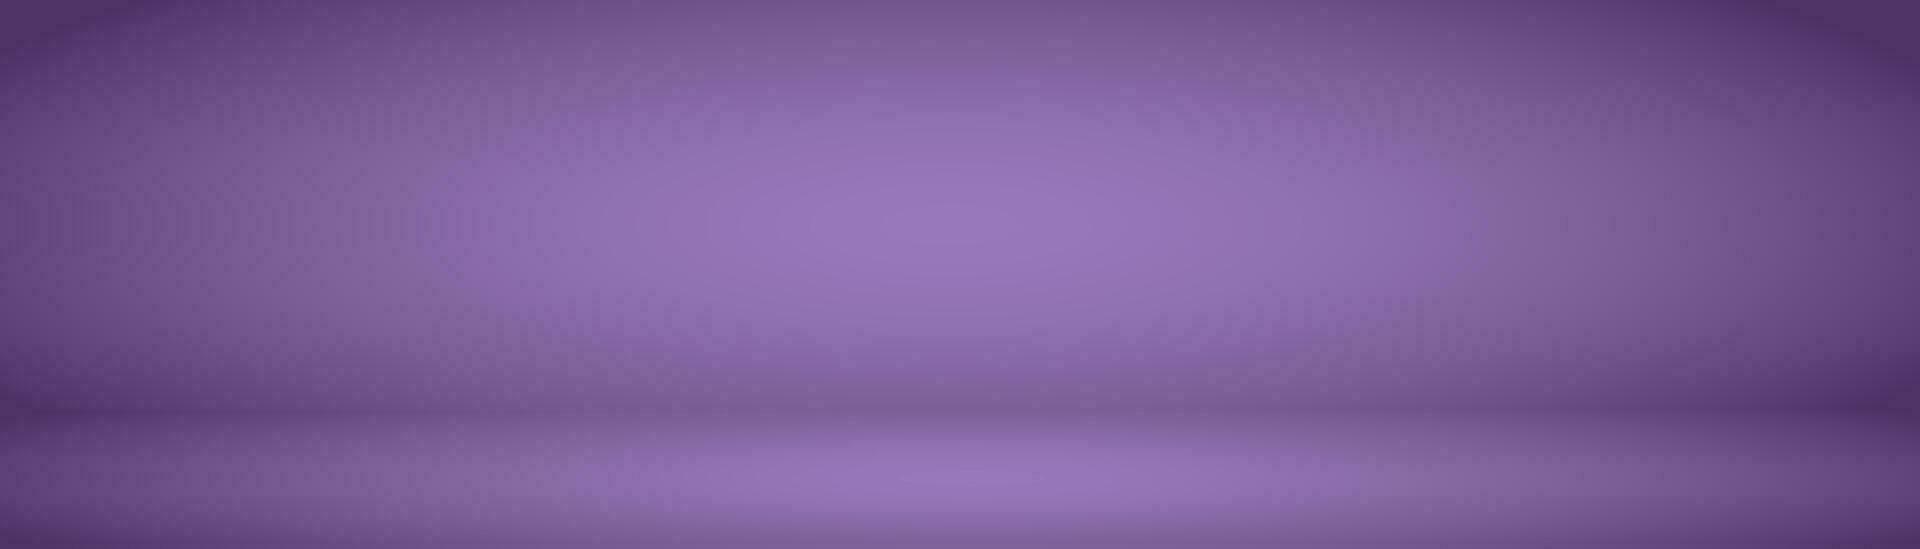 Abstract background. The studio space is empty. With a smooth and soft purple color vector